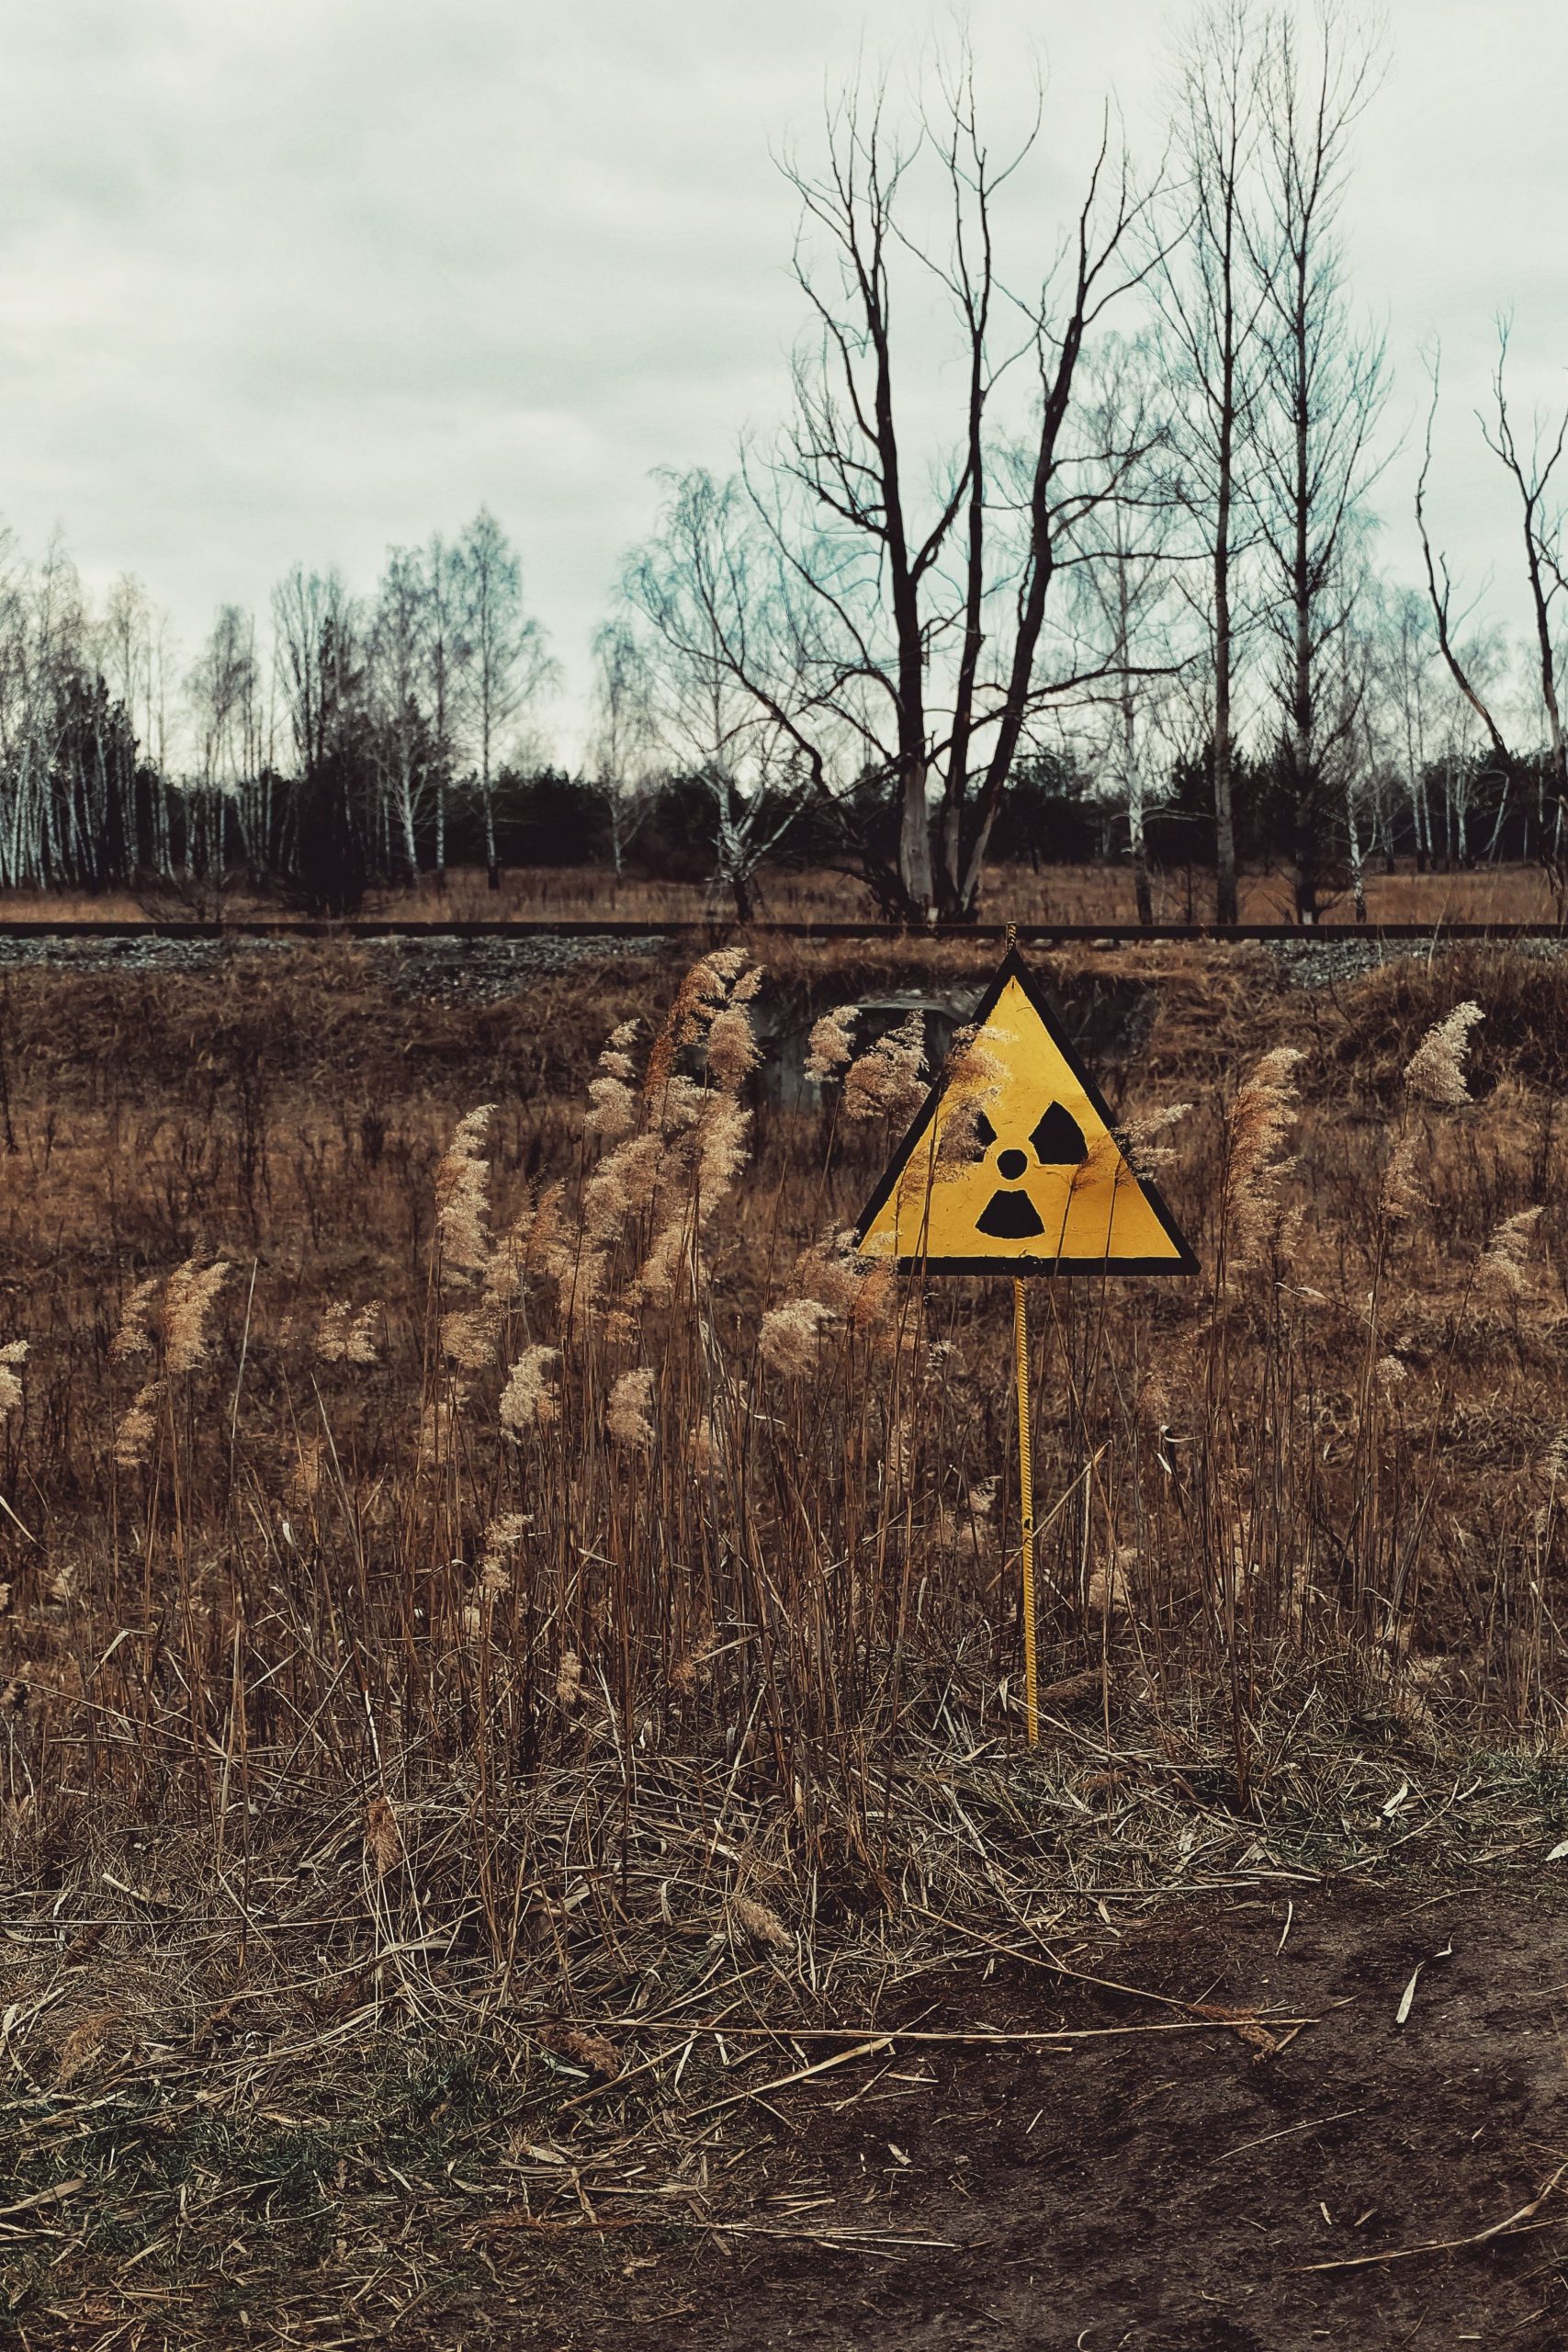 Russian forces loot, destroy Chernobyl radiation monitoring lab, says Ukraine